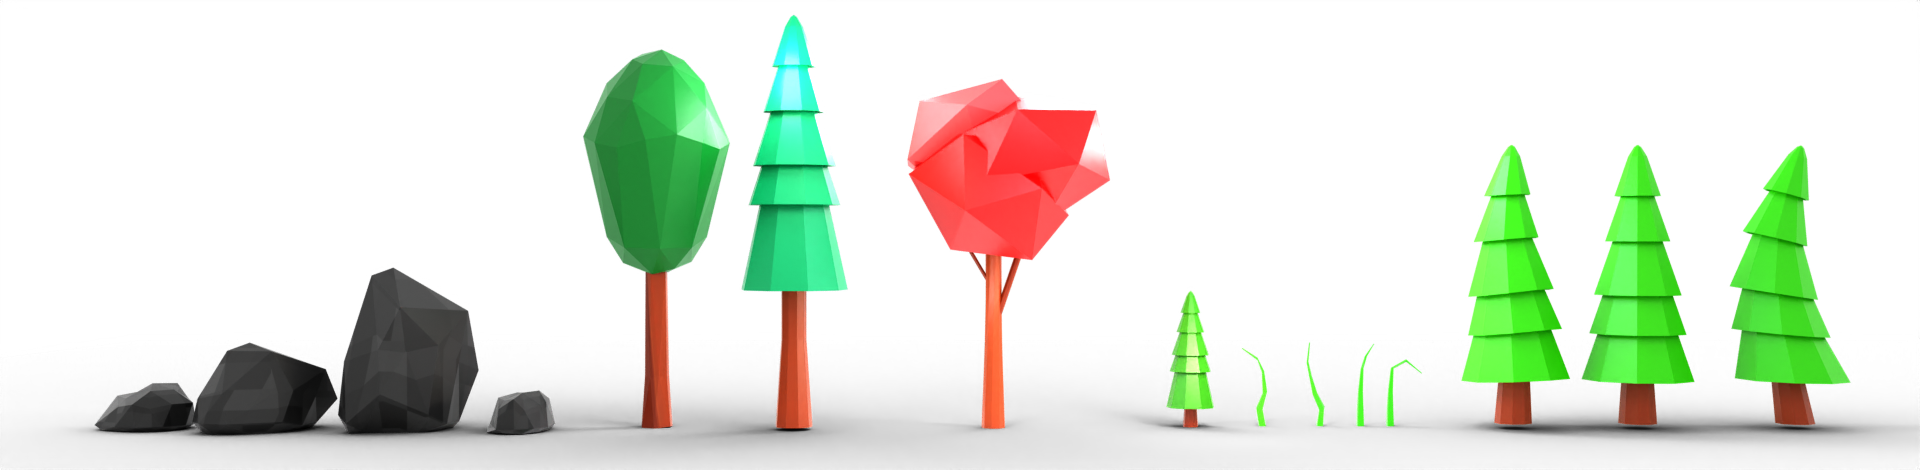 Low poly forest asset pack FREE